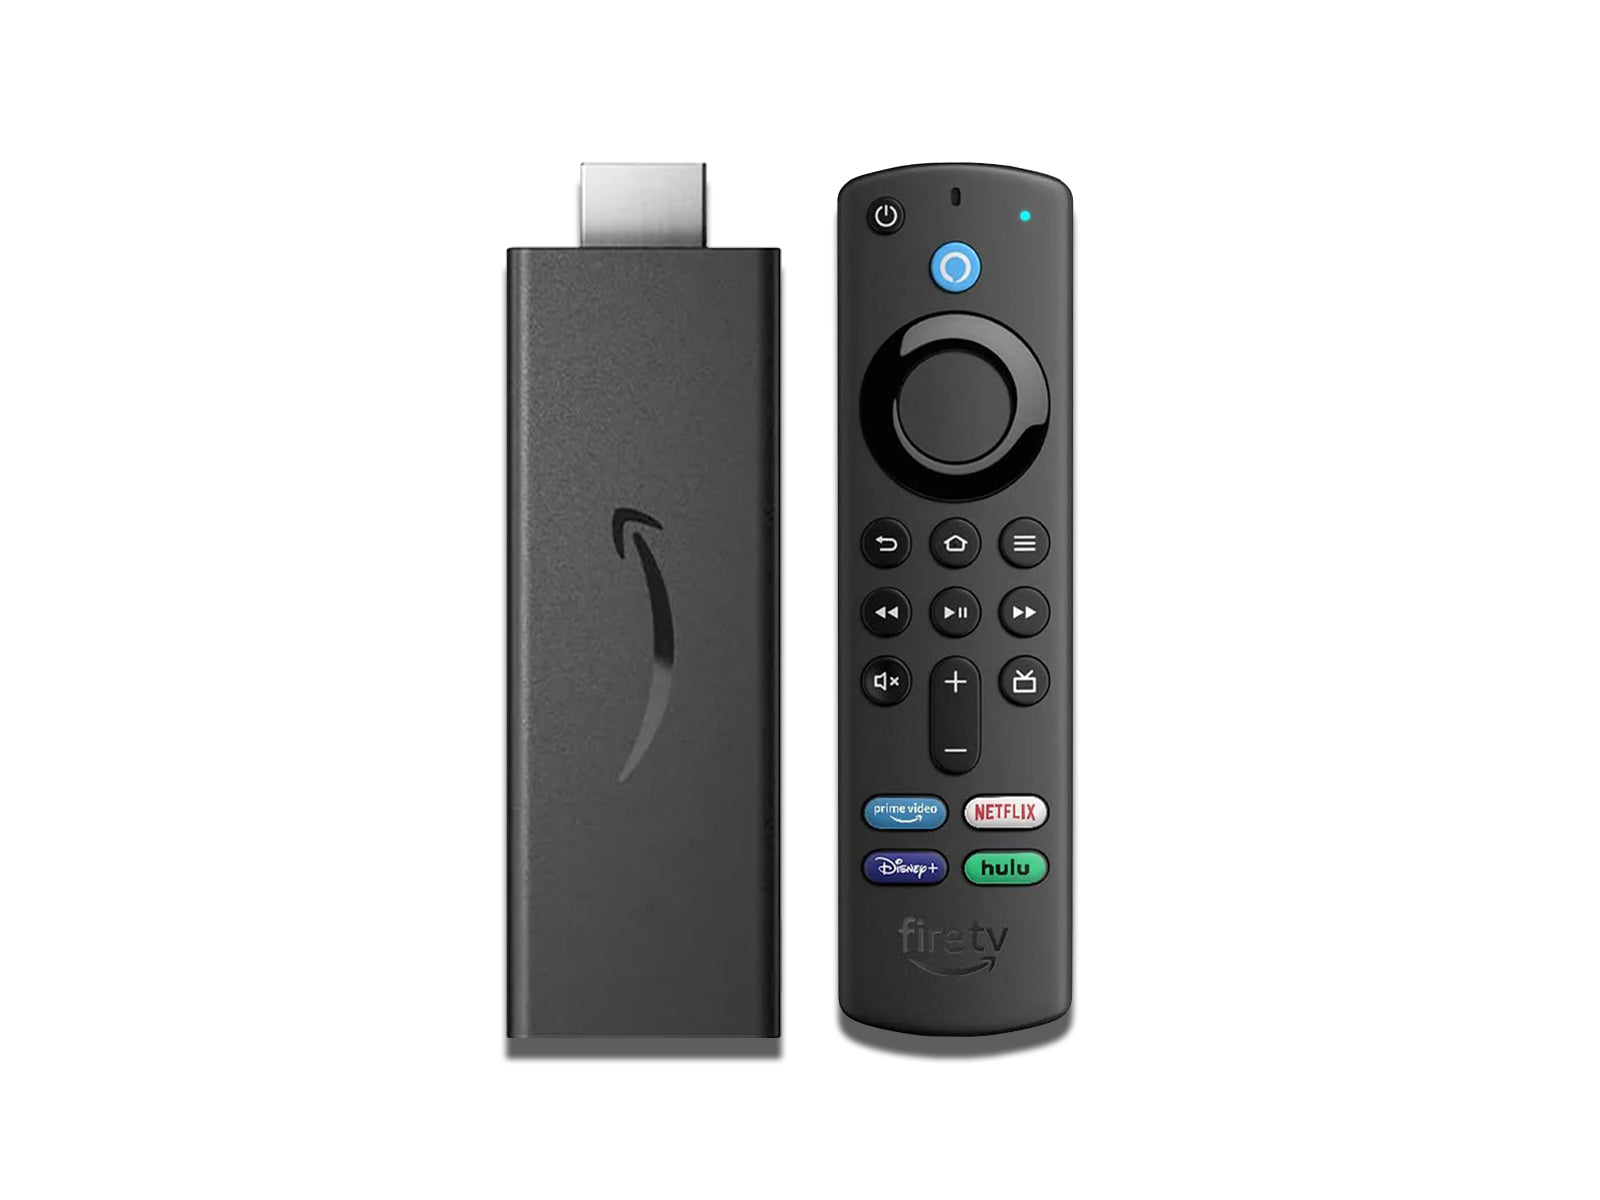 Image of the Firestick and Remote Control on the white background